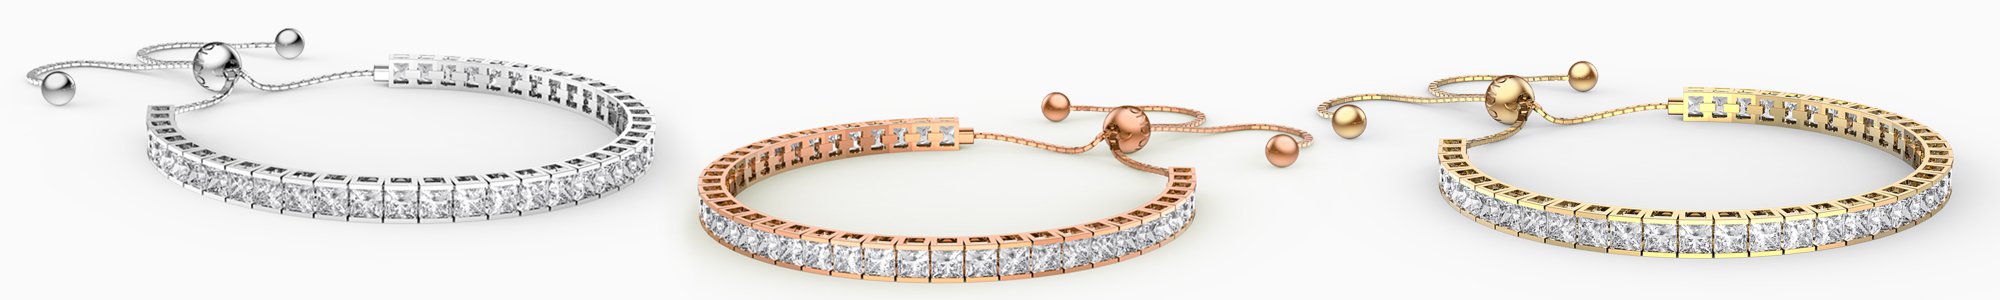 Shop Princess Friendship Bracelets by Jian London. Buy direct and save from our wide range of princess bracelets at the Jian London Jewellery Store. Free UK Delivery.